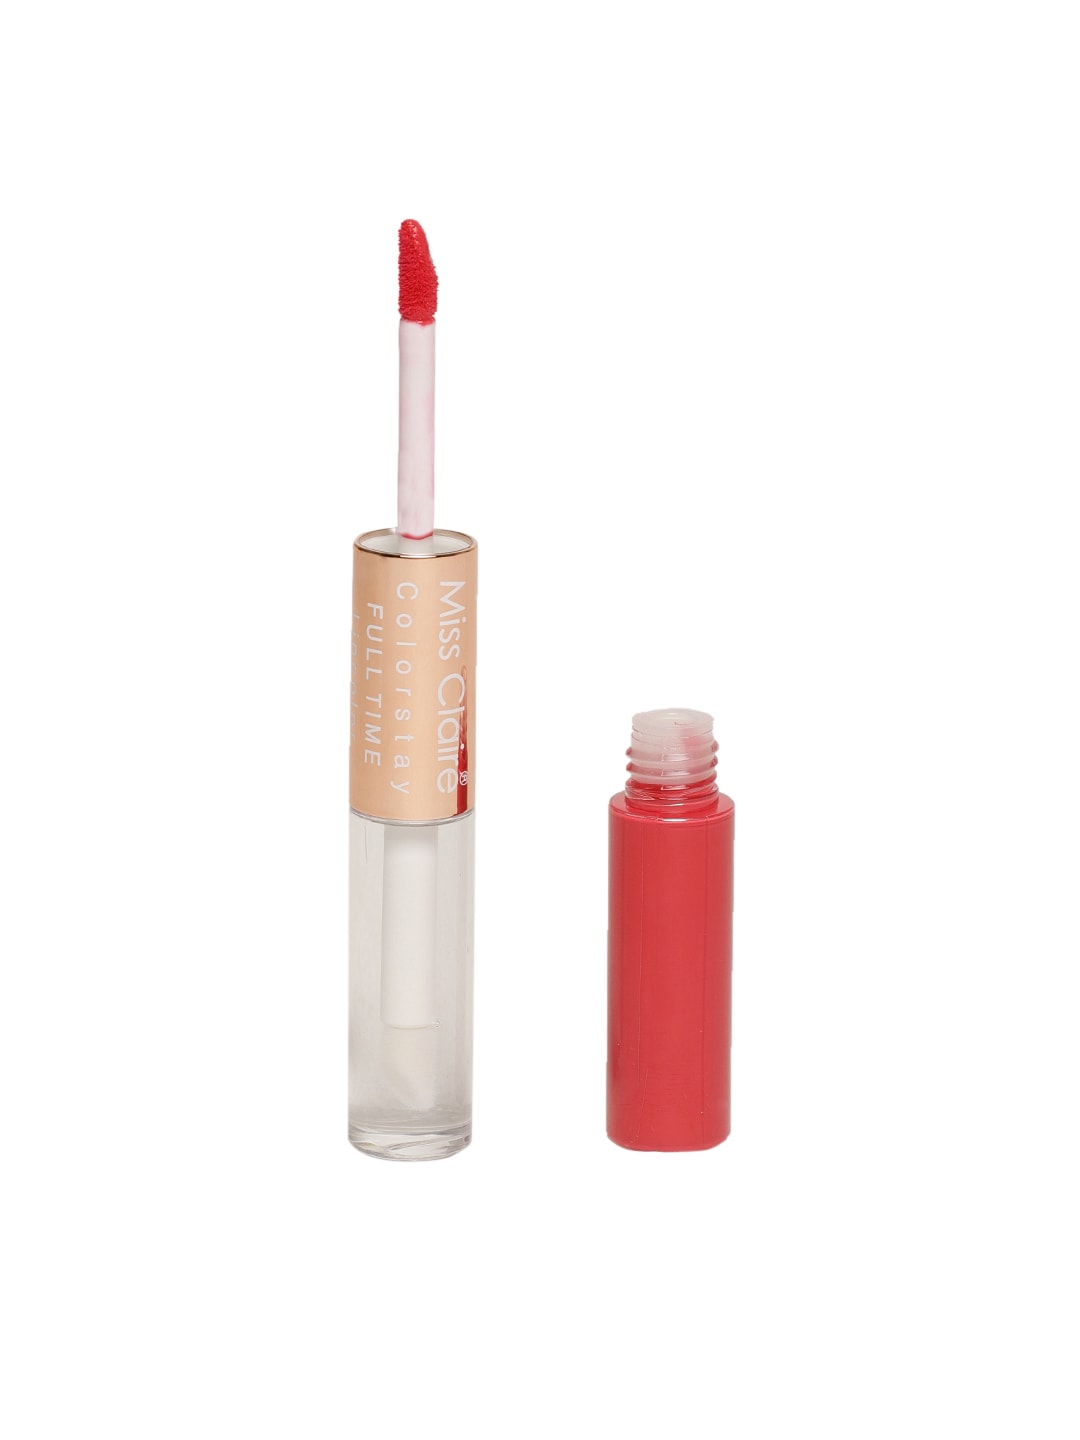 Miss Claire Colorstay Full Time 21 Lipcolor 10 ml Price in India